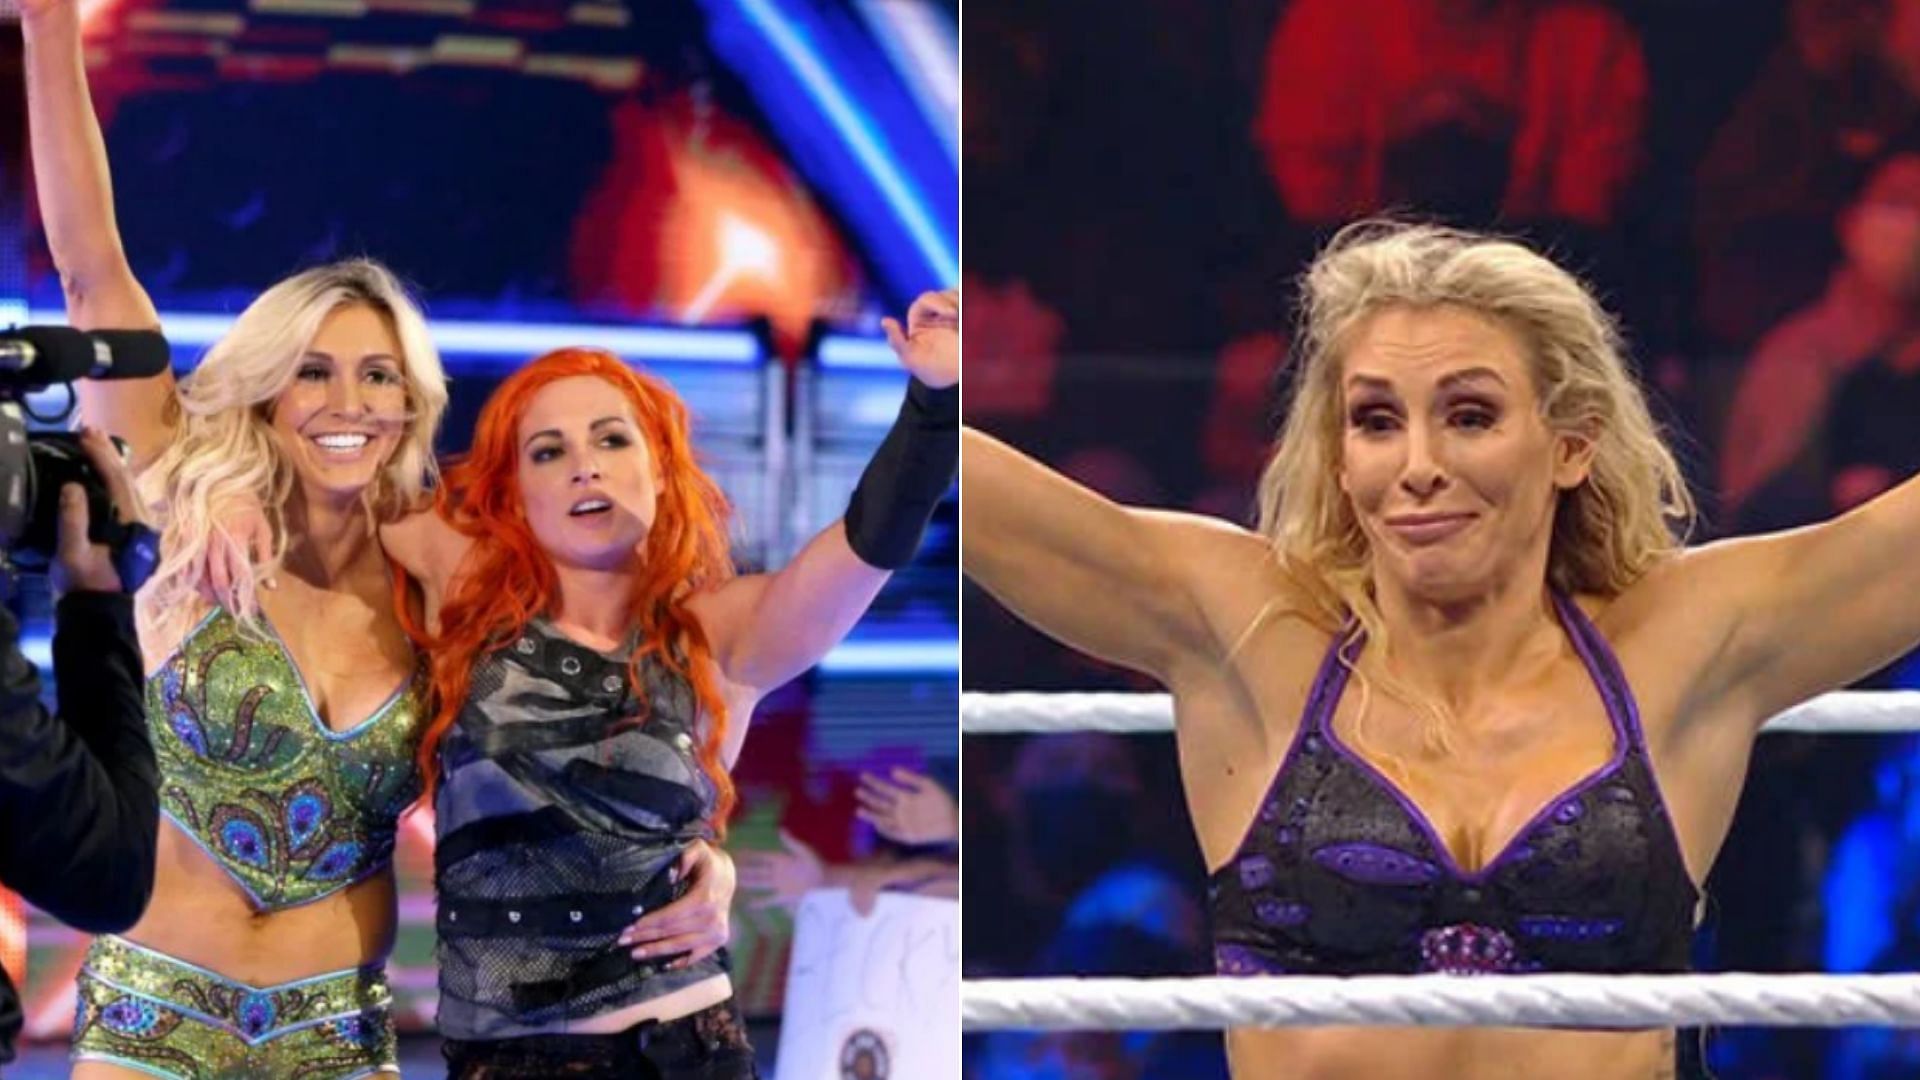 Becky Lynch and Charlotte Flair were once close friends